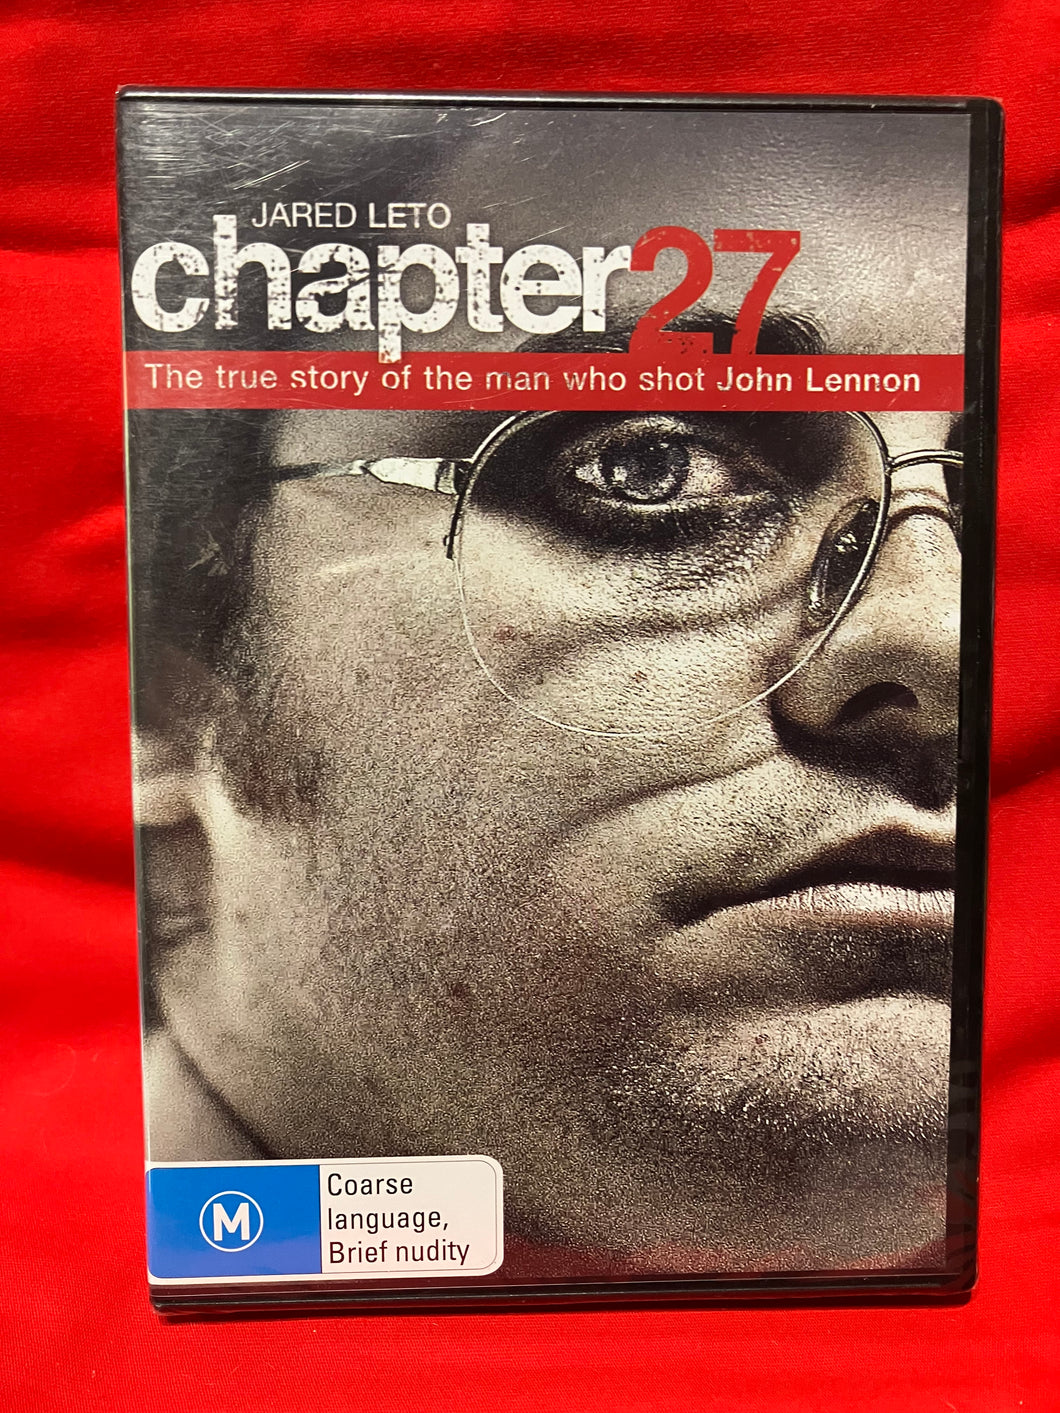 CHAPTER 27 - DVD (SEALED)